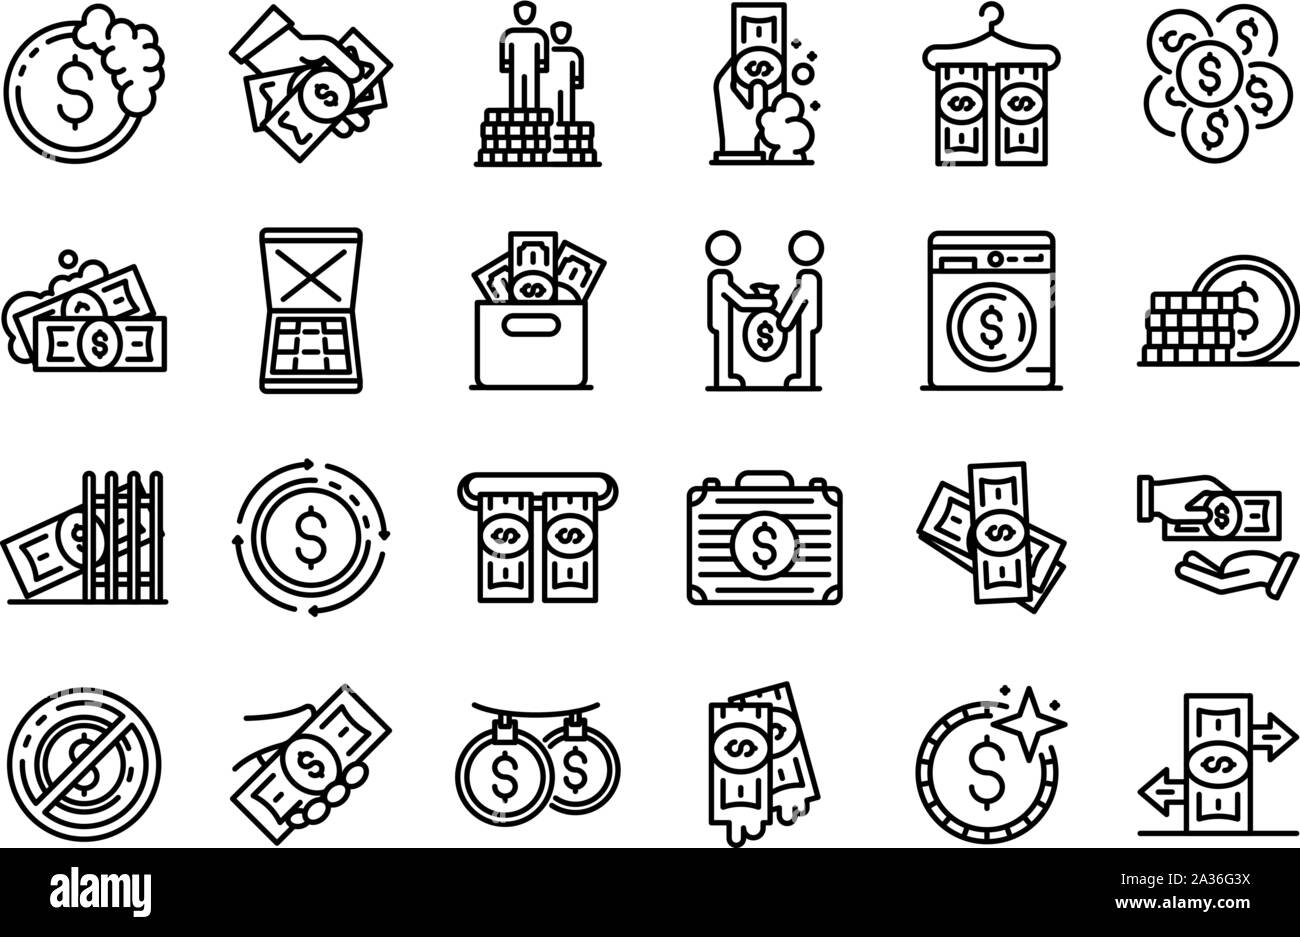 Money laundering icons set, outline style Stock Vector